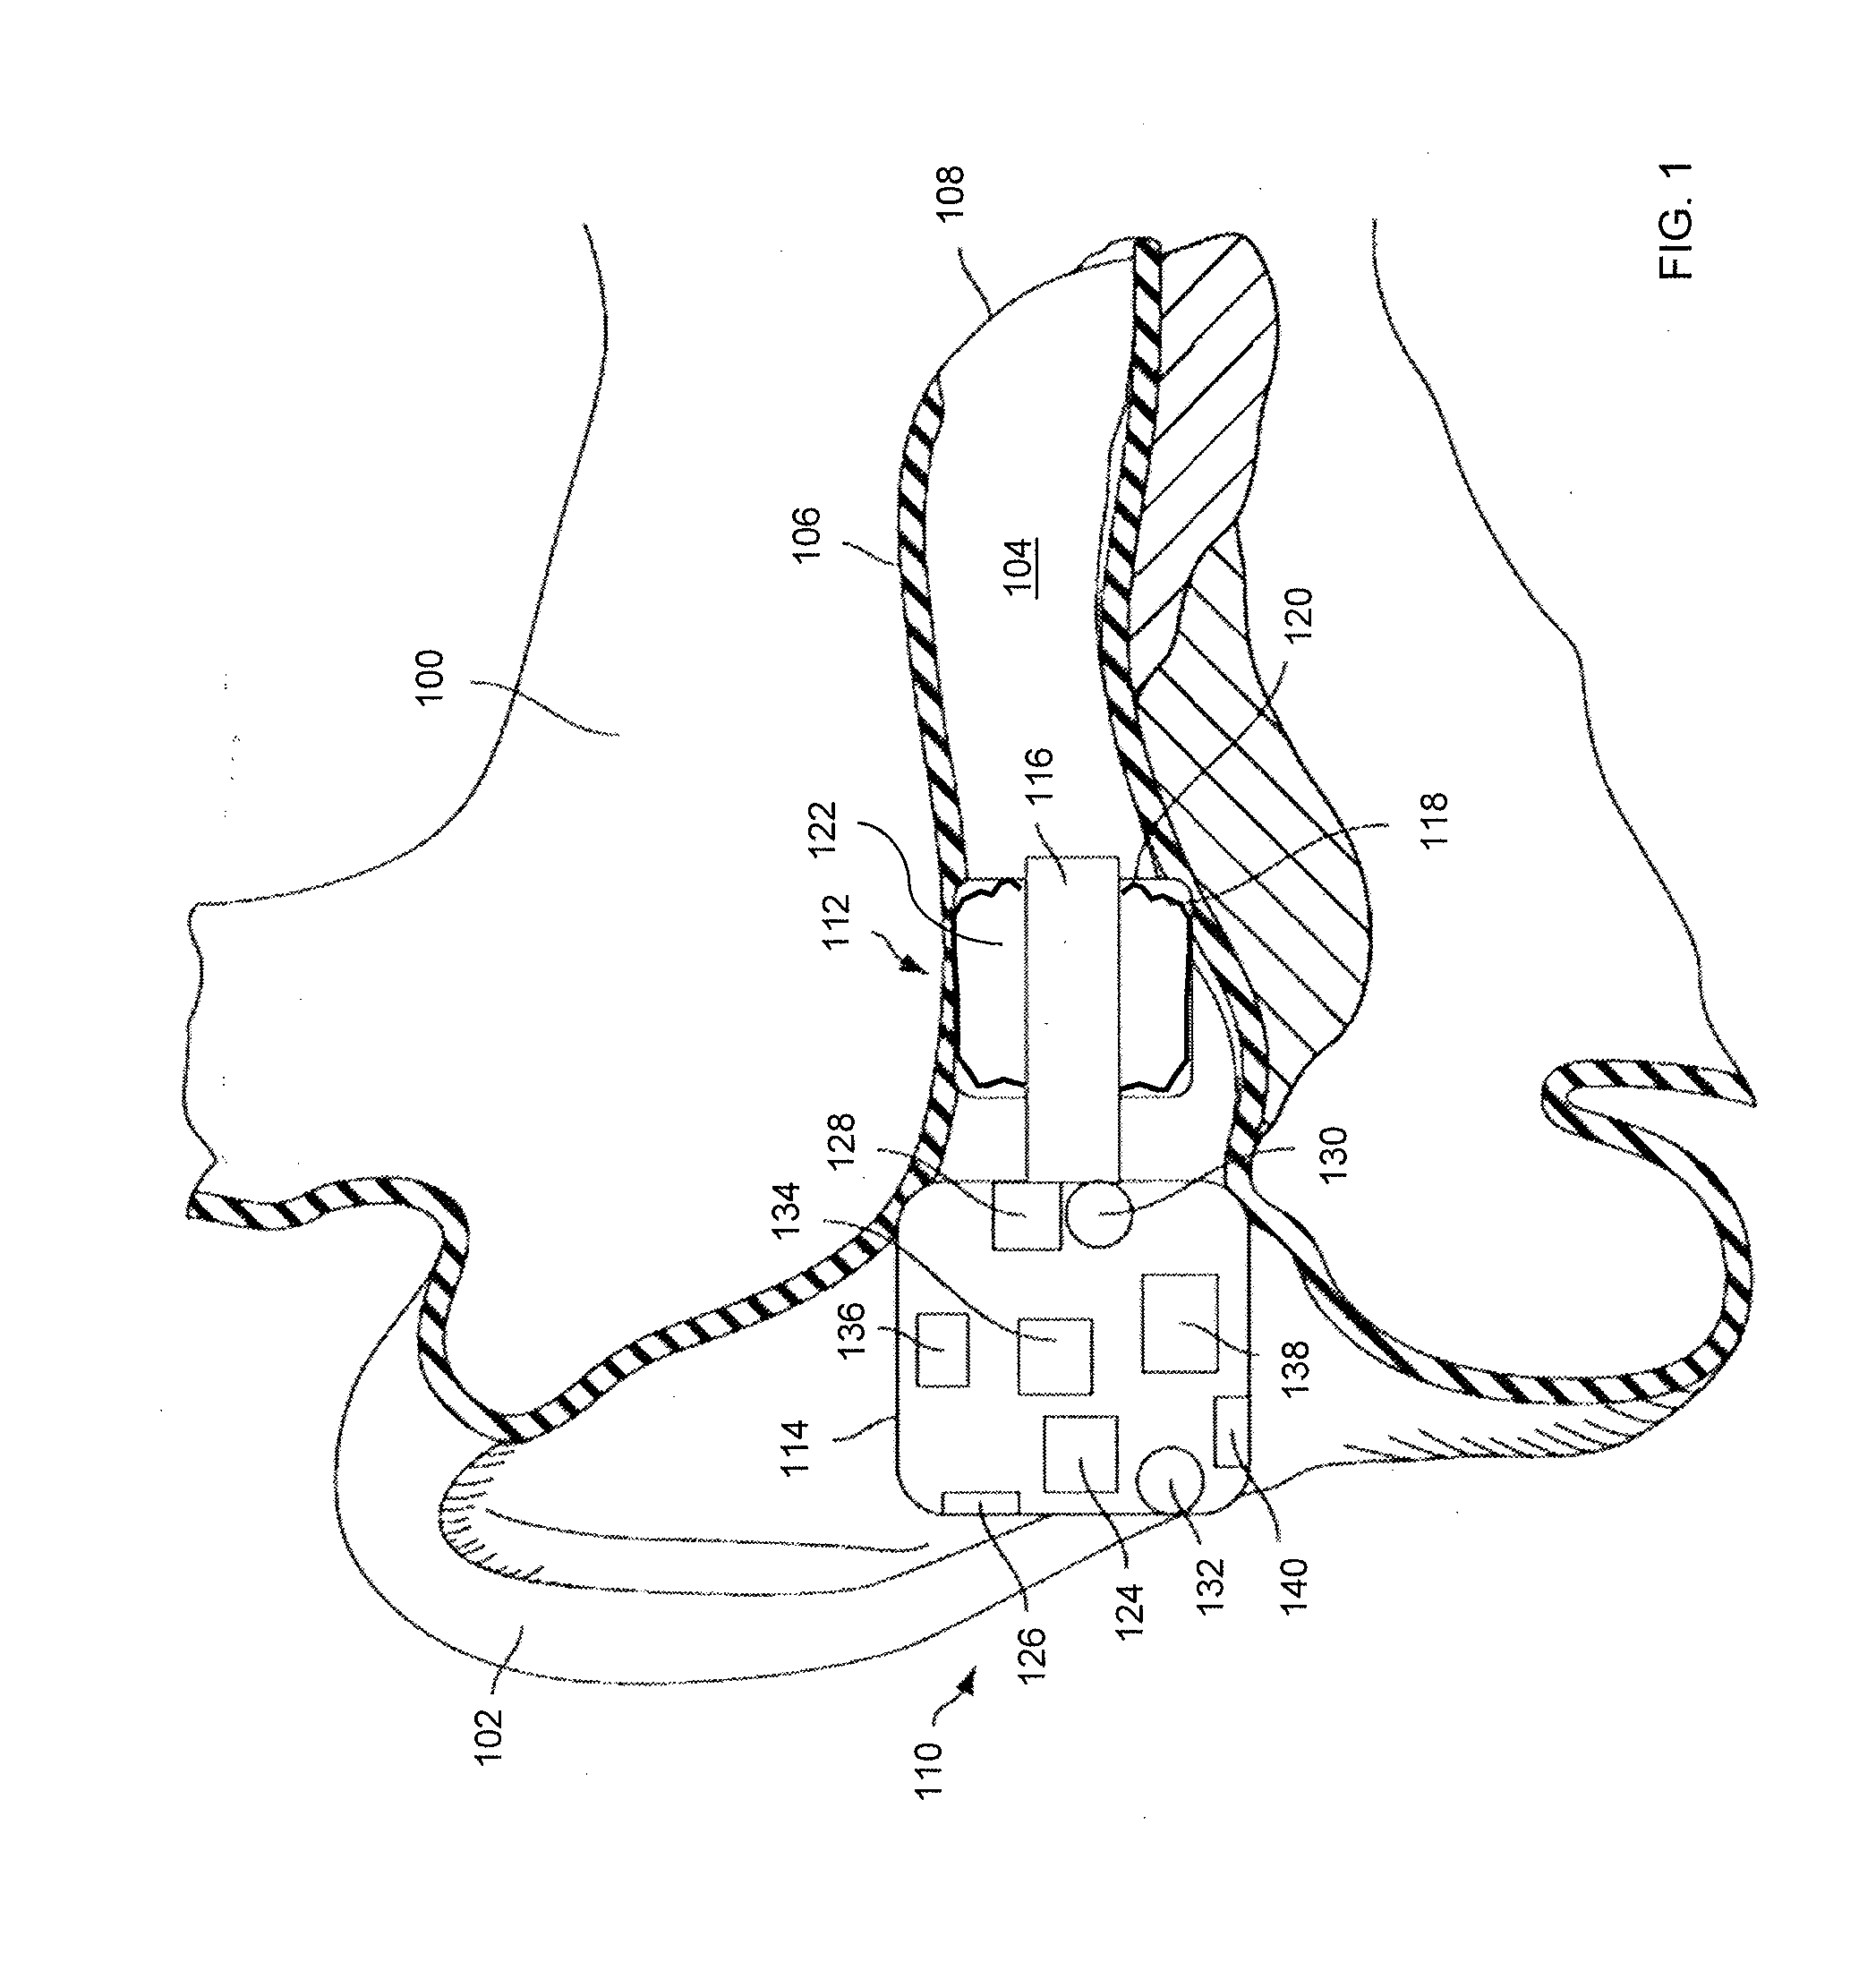 Occlusion device capable of occluding an ear canal